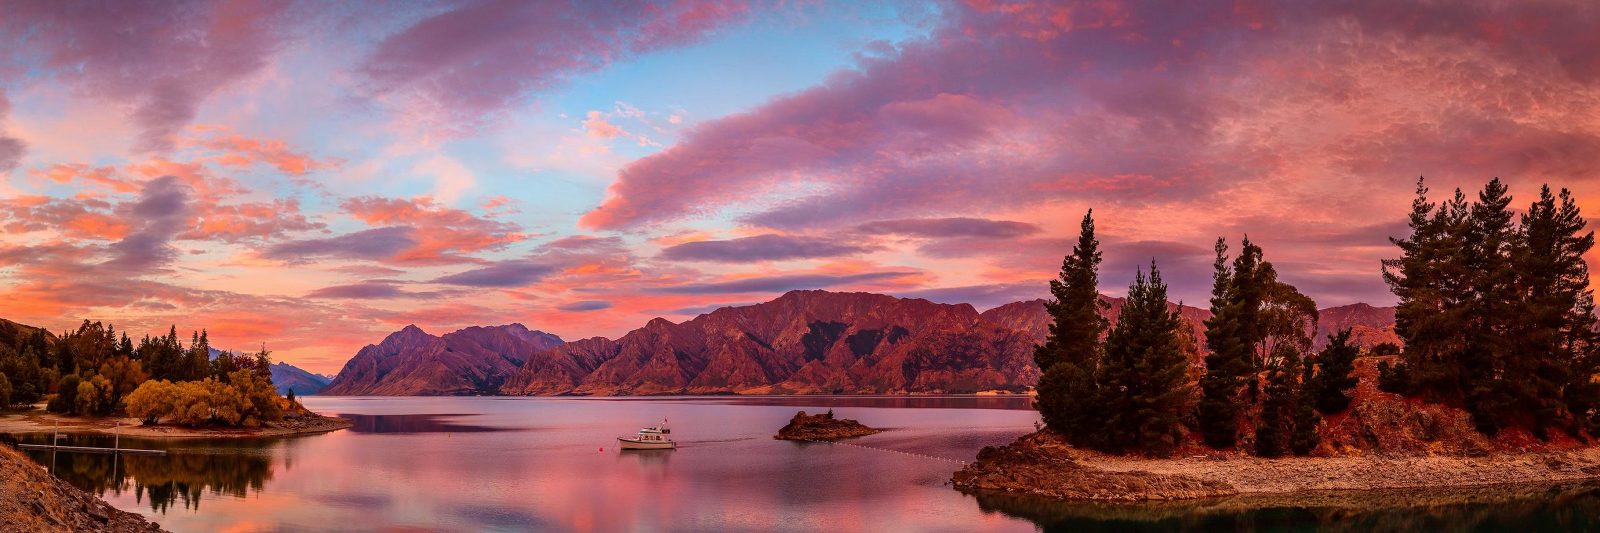 A small boat is dwarfed by the mountains surrounding Lake Hawea, near Wanaka, New Zealand during a very colourful sunrise